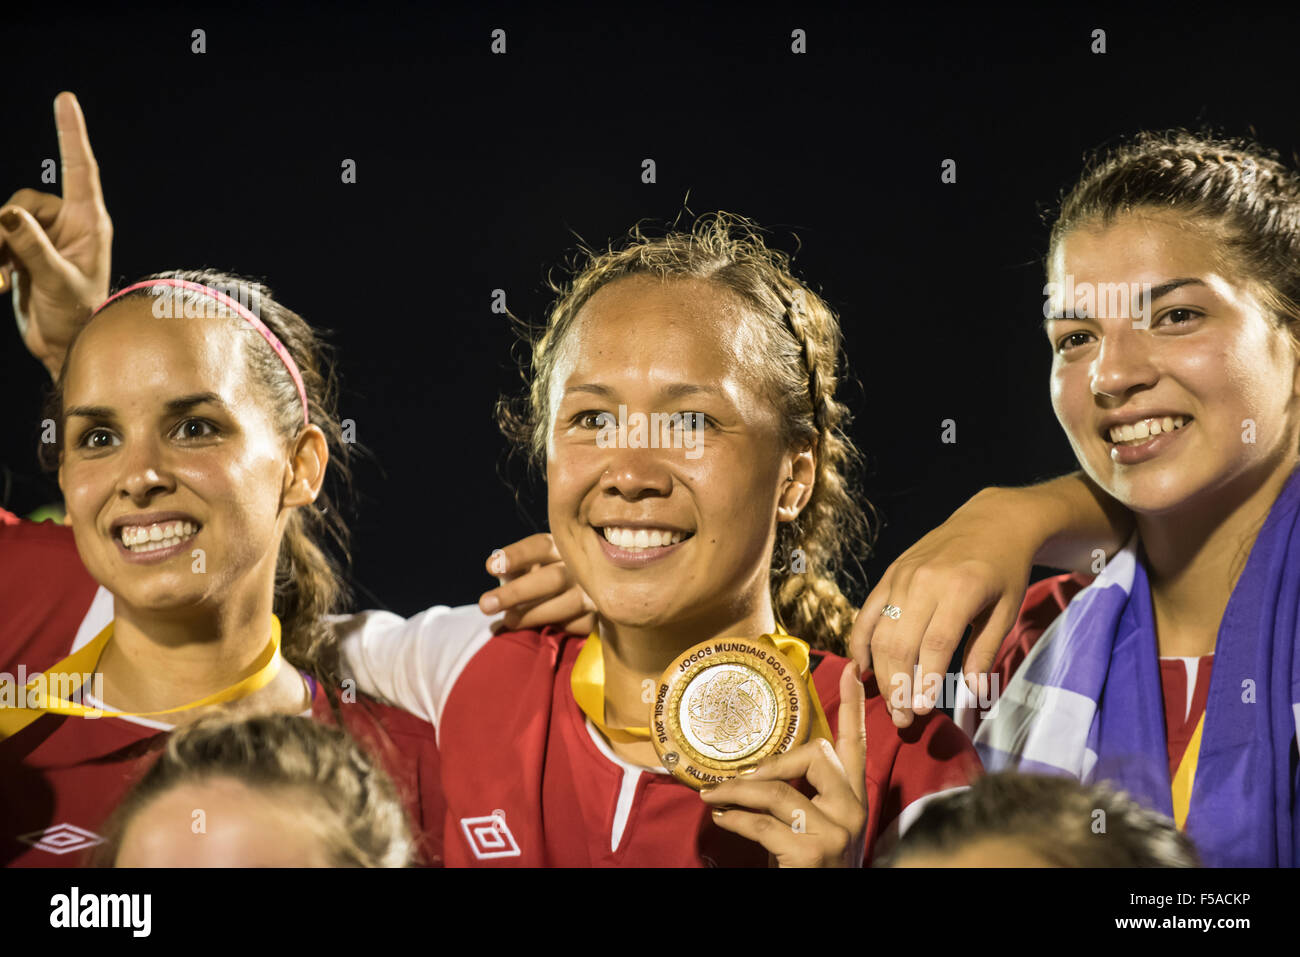 Palmas, Brazil. 30th October, 2015. The USA indigenous women's team celebrate after winning the final against the local Xerente tribe at the International Indigenous Games in the city of Palmas, Tocantins State, Brazil. The USA won on a penalty shoot-out after a 0-0 match. Credit:  Sue Cunningham Photographic/Alamy Live News Stock Photo